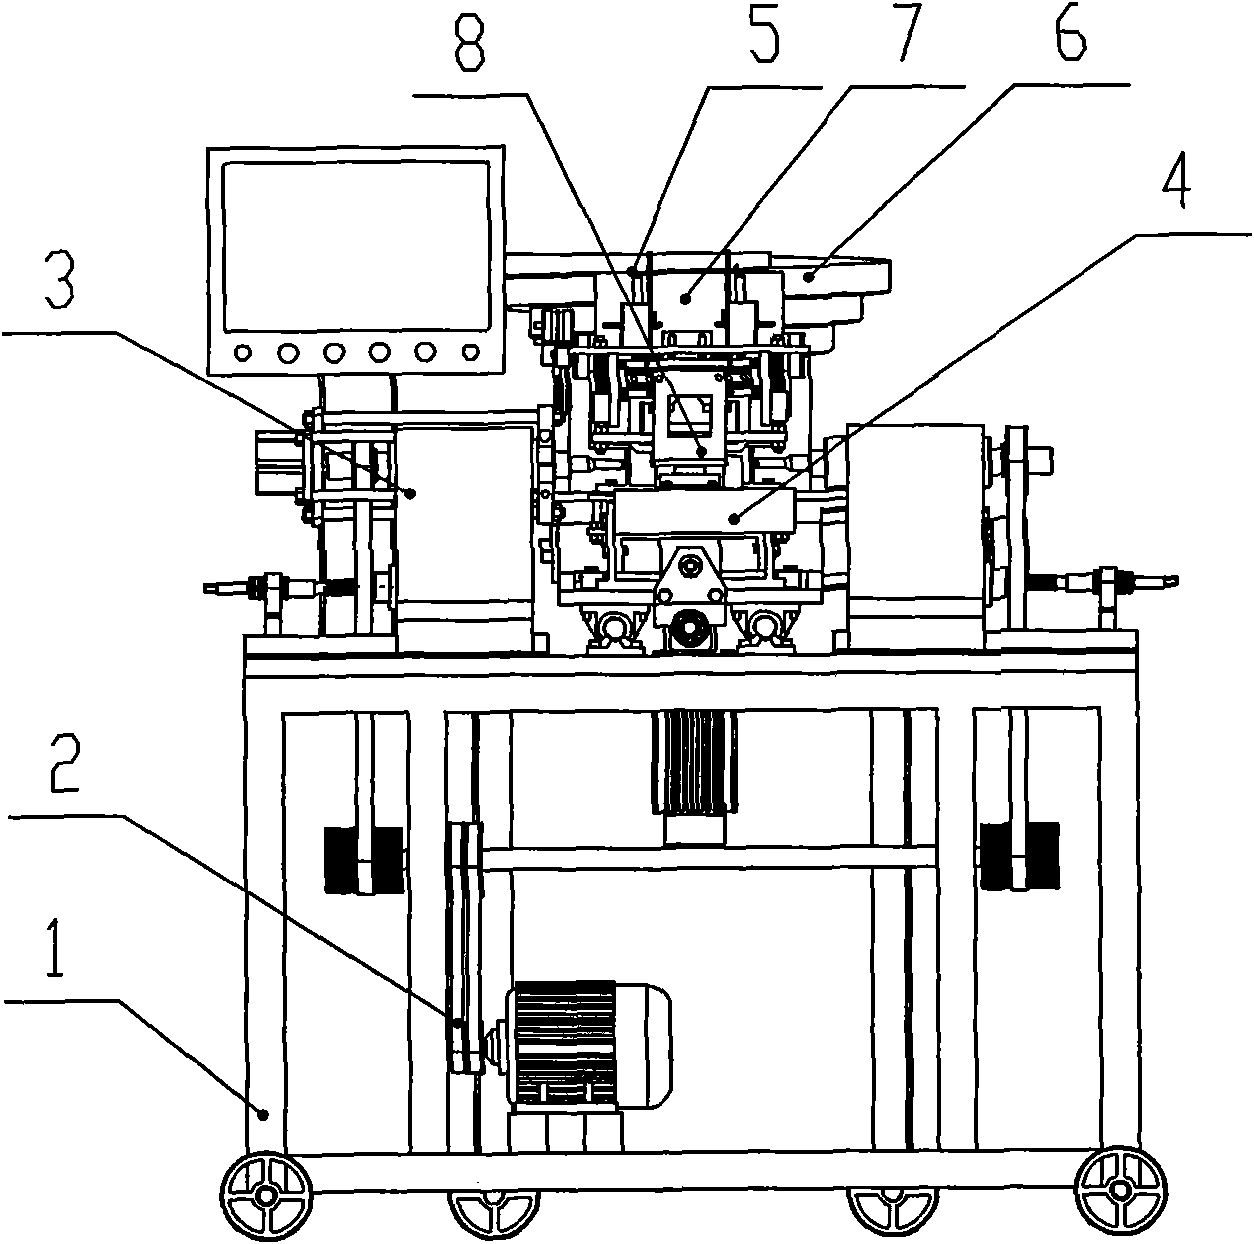 Numerical control machine tool for machining wooden handle